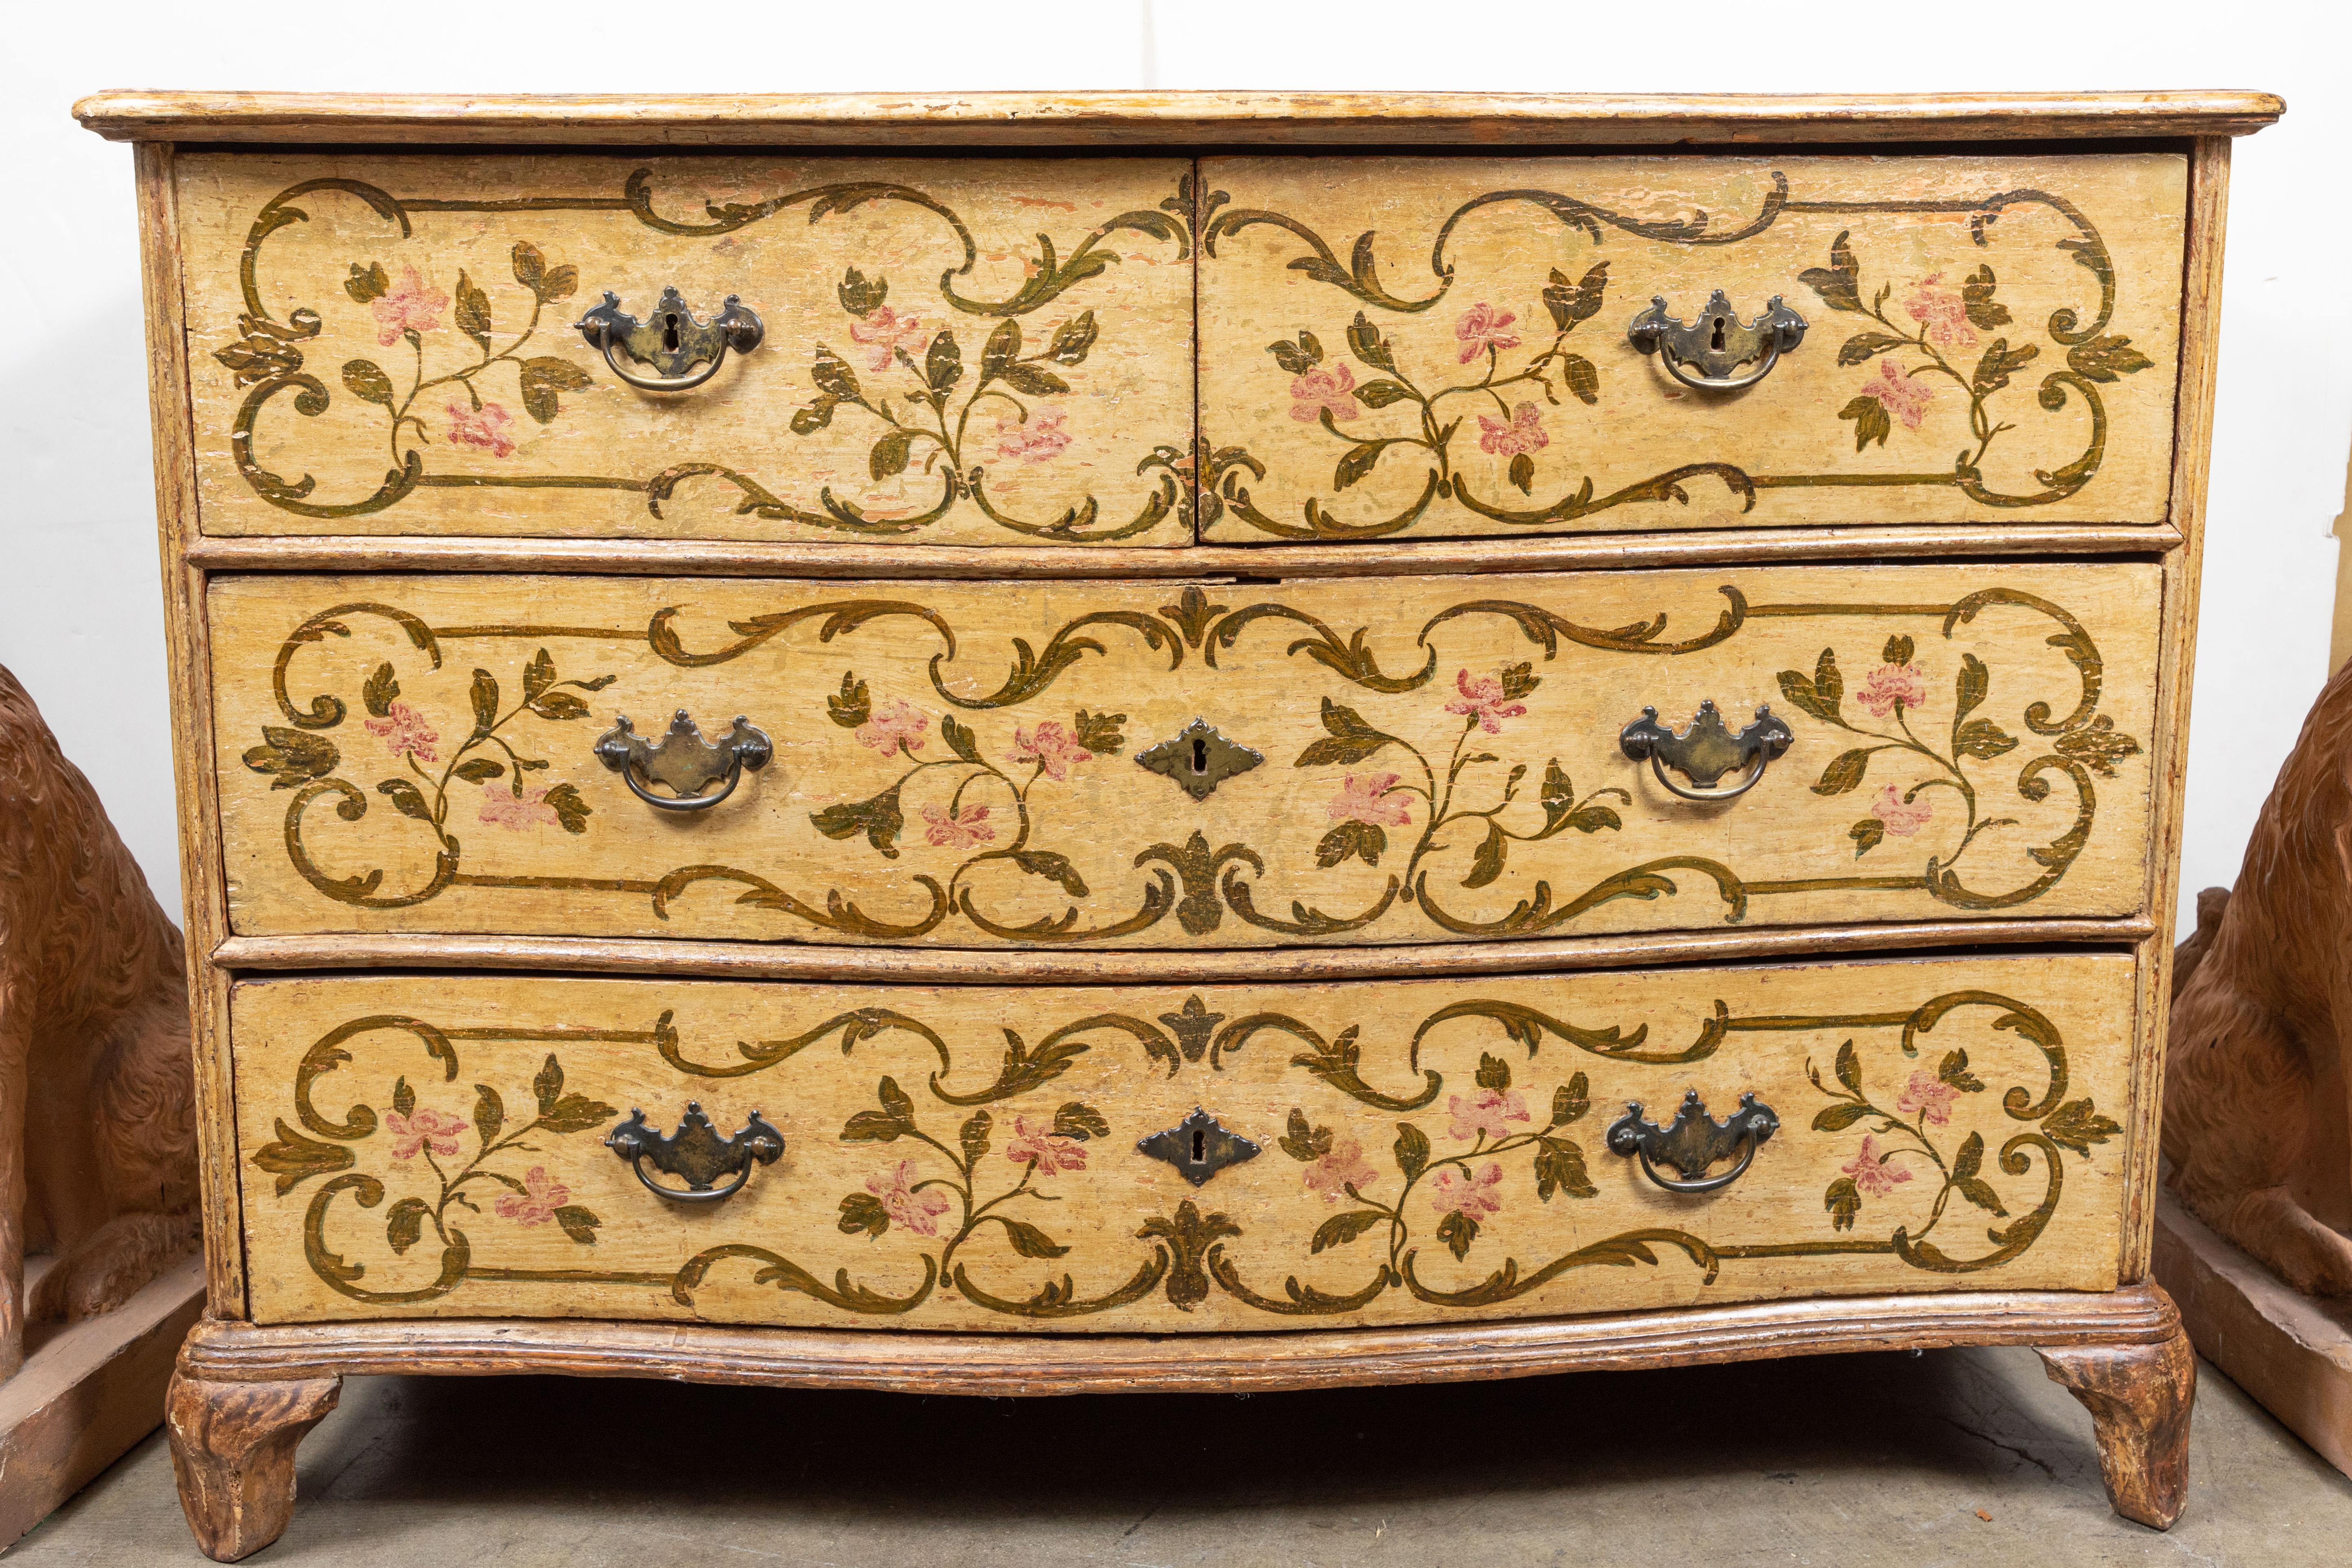 Large, circa 1850, hand carved and painted, Venetian, two-over-two, bow-front commode with faux marble top. The whole featuring lush, foliate forms throughout, and embellished with pink rose blossoms.